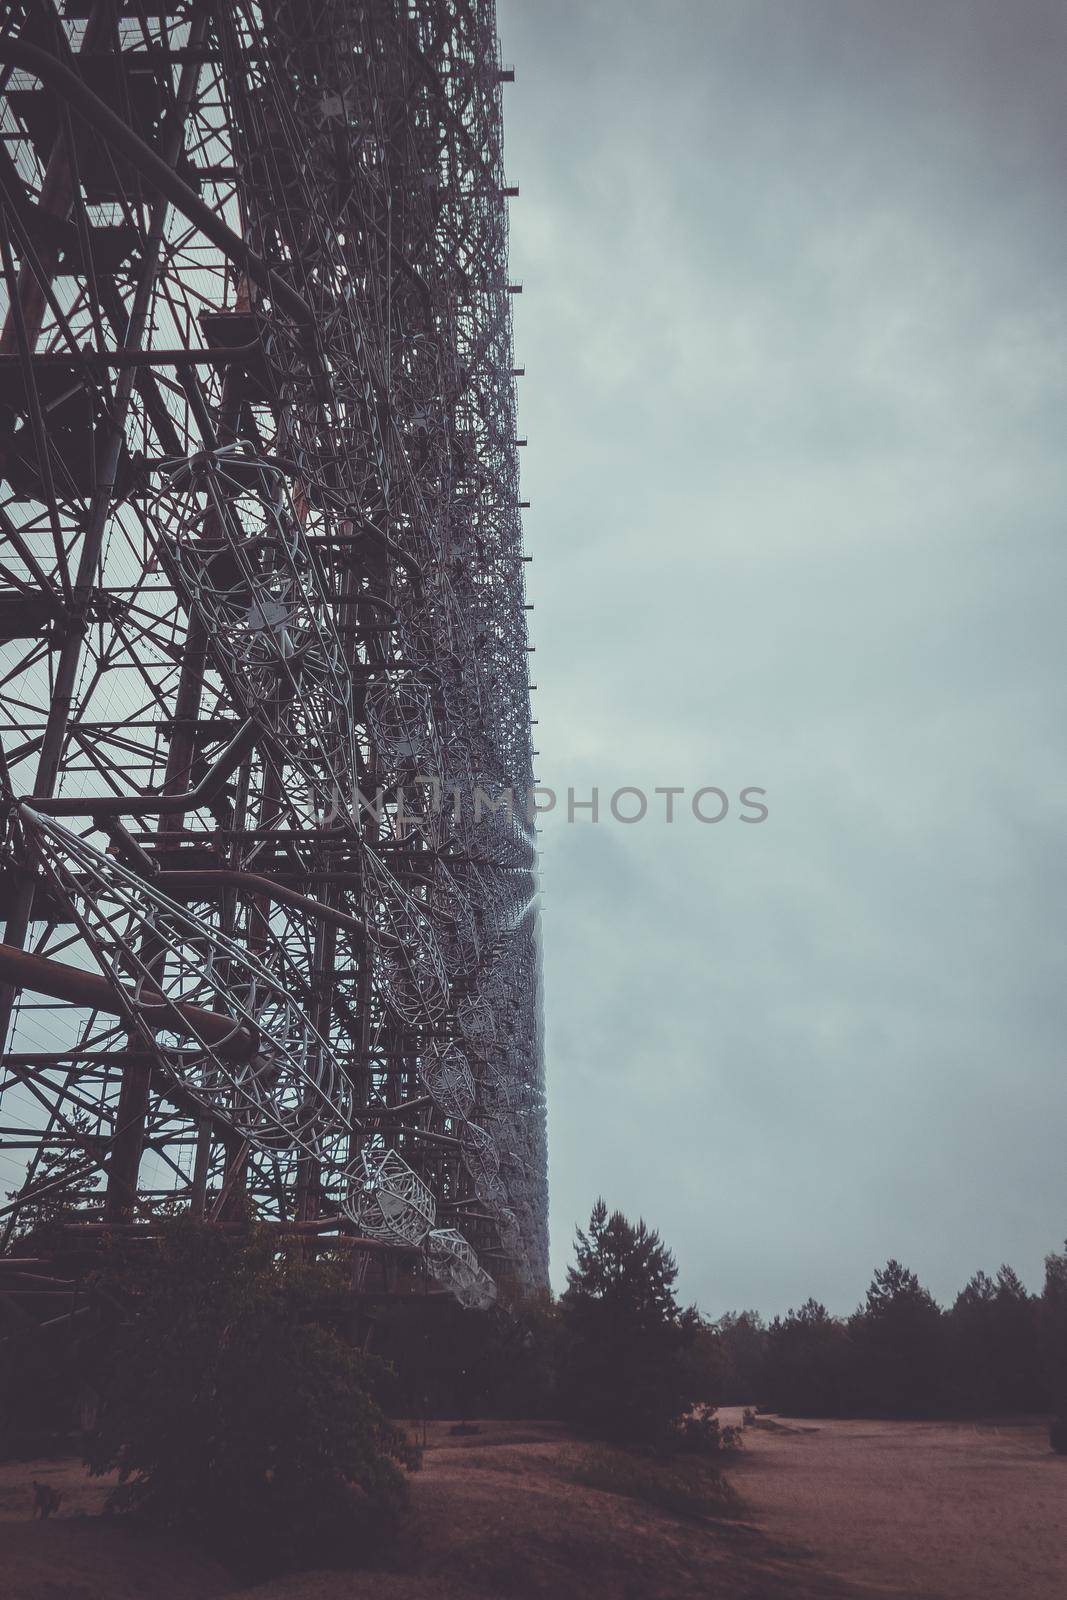 Soviet over-the-horizon radar station Duga in the Chernobyl exclusion zone, Ukraine by mosfet_ua